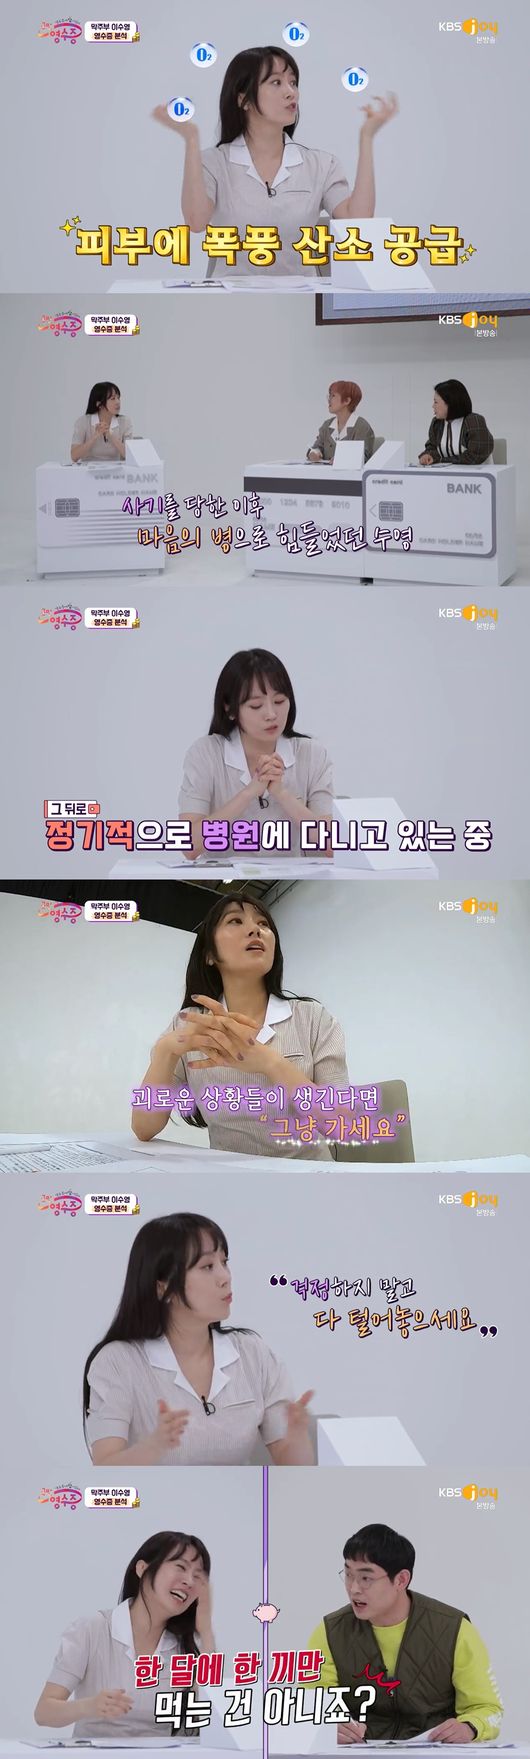 Singer Lee Soo-young reveals story of losing all property at 30In KBS Joy National Receipt broadcast on the 1st, Singer Lee Soo-young appeared as a guest and told the story of suffering from the Records of the Grand Historian and attracted Eye-catching.Lee Soo-young is a two-day juniorHe admitted that he had raised a lot of money as a ballad queen.But Lee Soo-young said: At 30, I hit Records of the Grand Historian hard: Twentyes.threetiesI lost it all and got my debt. Young Jin Park said, You should not lend money, I get notarized when I lend money to my wife.Lee Soo-young heard this and said, Thats a charge, making the surroundings laugh.Lee Soo-young said of the investment method: I dont invest, Im making regular savings because I think its most important to keep the principal.I thought it was five when I interviewed, but I saw seven. It was too tight and I canceled. Lee Soo-young said on the day, Lets spend all the money I have earned hard.Lee Soo-young said, I think the worst thing I can give to my child is money, attracting Eye-catching.Lee Soo-young said, The child likes food more than rice. A few days ago, I set up a table with sesame leaves, tomato fried, seaweed soup, and the child ate triangular kimbap. Lee Soo-young then said that his son put 50,000 won in his pocket money received from his grandmother into his wallet, attracting Eye-catching.Lee Soo-young has attracted Eye-catching for a history of cashing game items as a sons birthday present.Lee Soo-young said, I just want my child to live there because there are many arcades like old days, but nowadays it is not.Lee Soo-young has a history of purchasing nail tips for broadcasting, which has attracted Eye-catching.Young Jin Park asked, Do you have nails and claws on the air? Lee Soo-young laughed, saying, There is a program to go out as a judge, but there are a lot of nails because I react.Lee Soo-young said, I am regularly going to the hospital due to panic disorder after being treated as a Records of the Grand Historian about the payment history of mental health hospital.